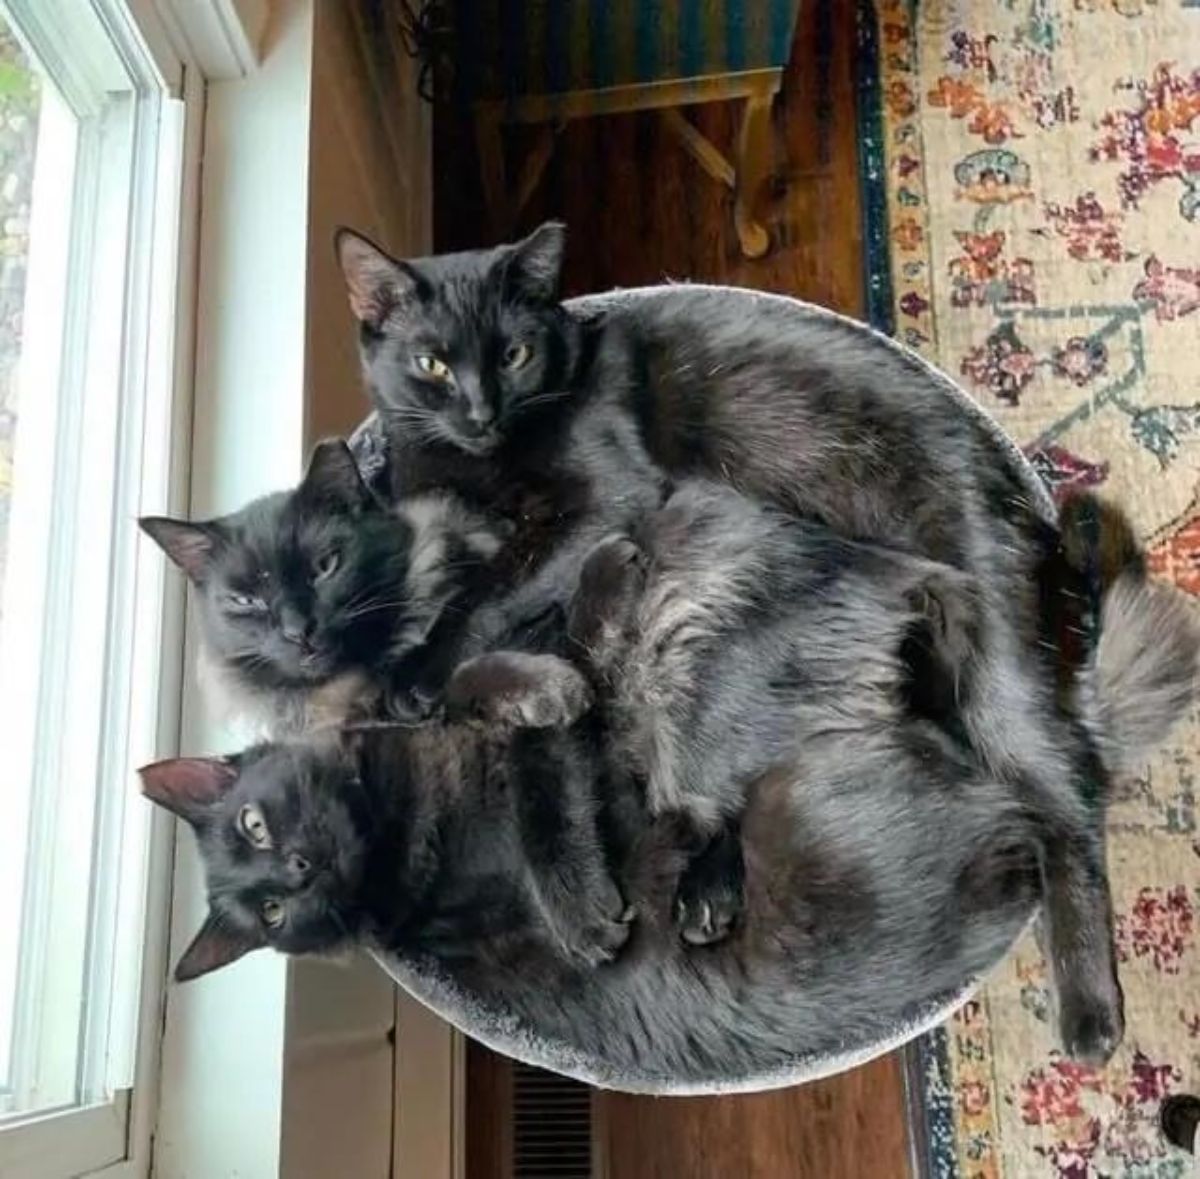 3 black cats laying in a grey cat bed together